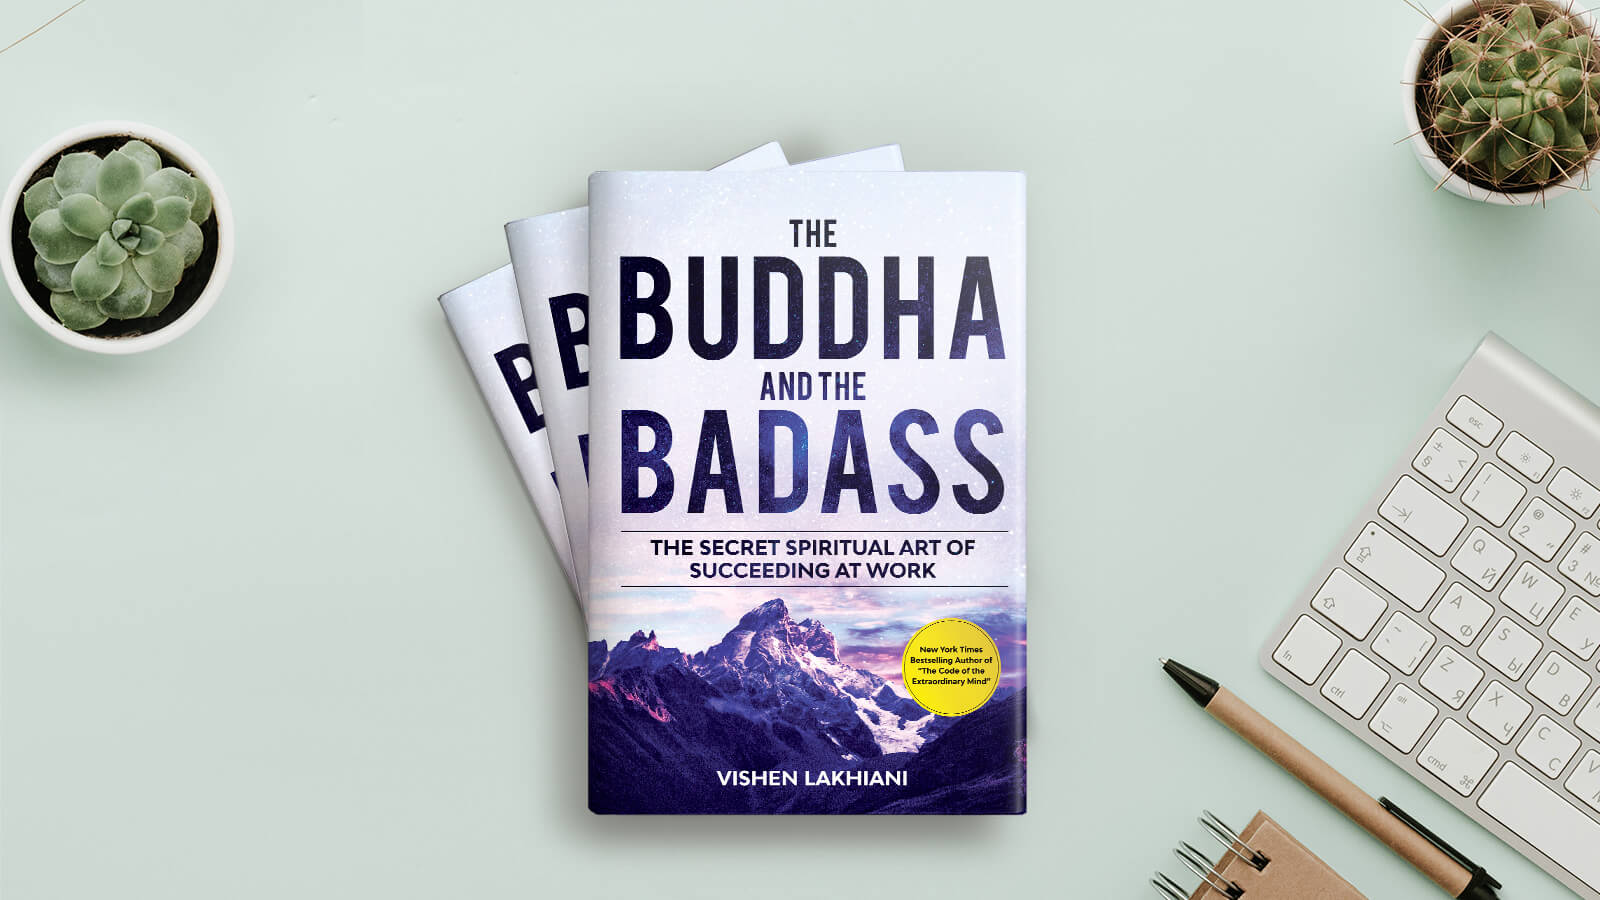 The Buddha & the Badass Book on the table